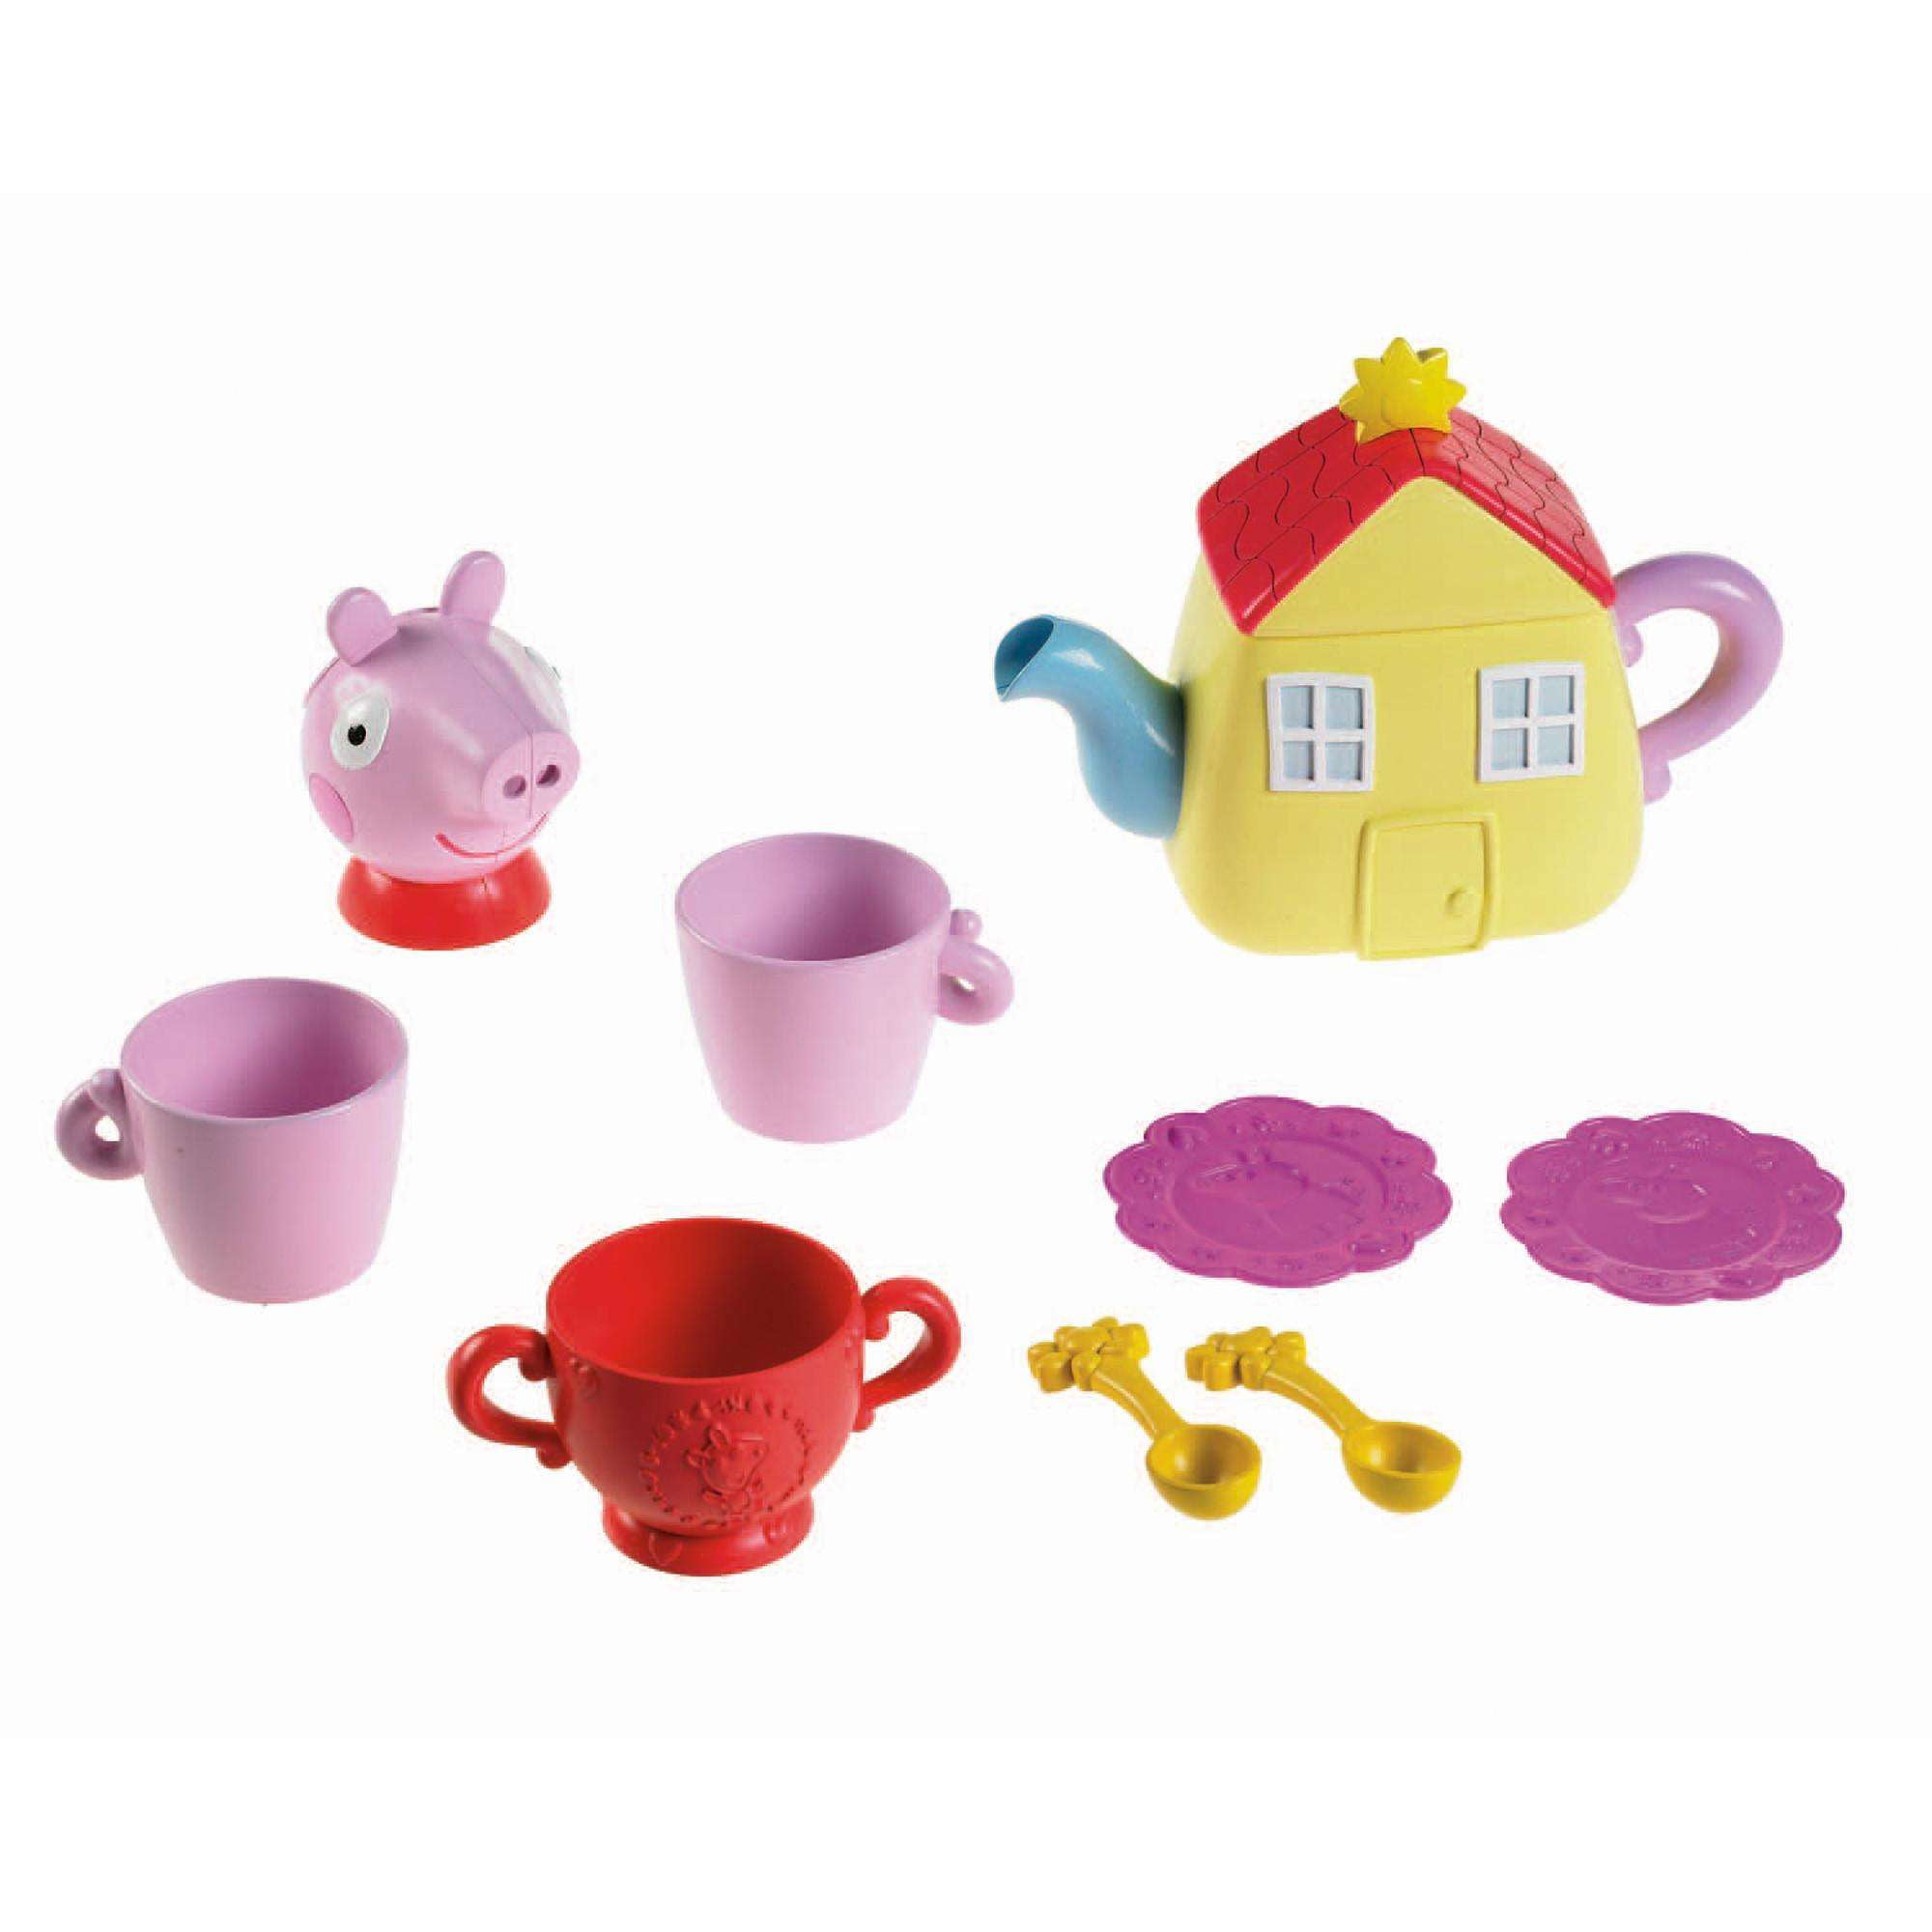 New Peppa Pig Family Peppa Pig Holding Tea Cup Set Of 5